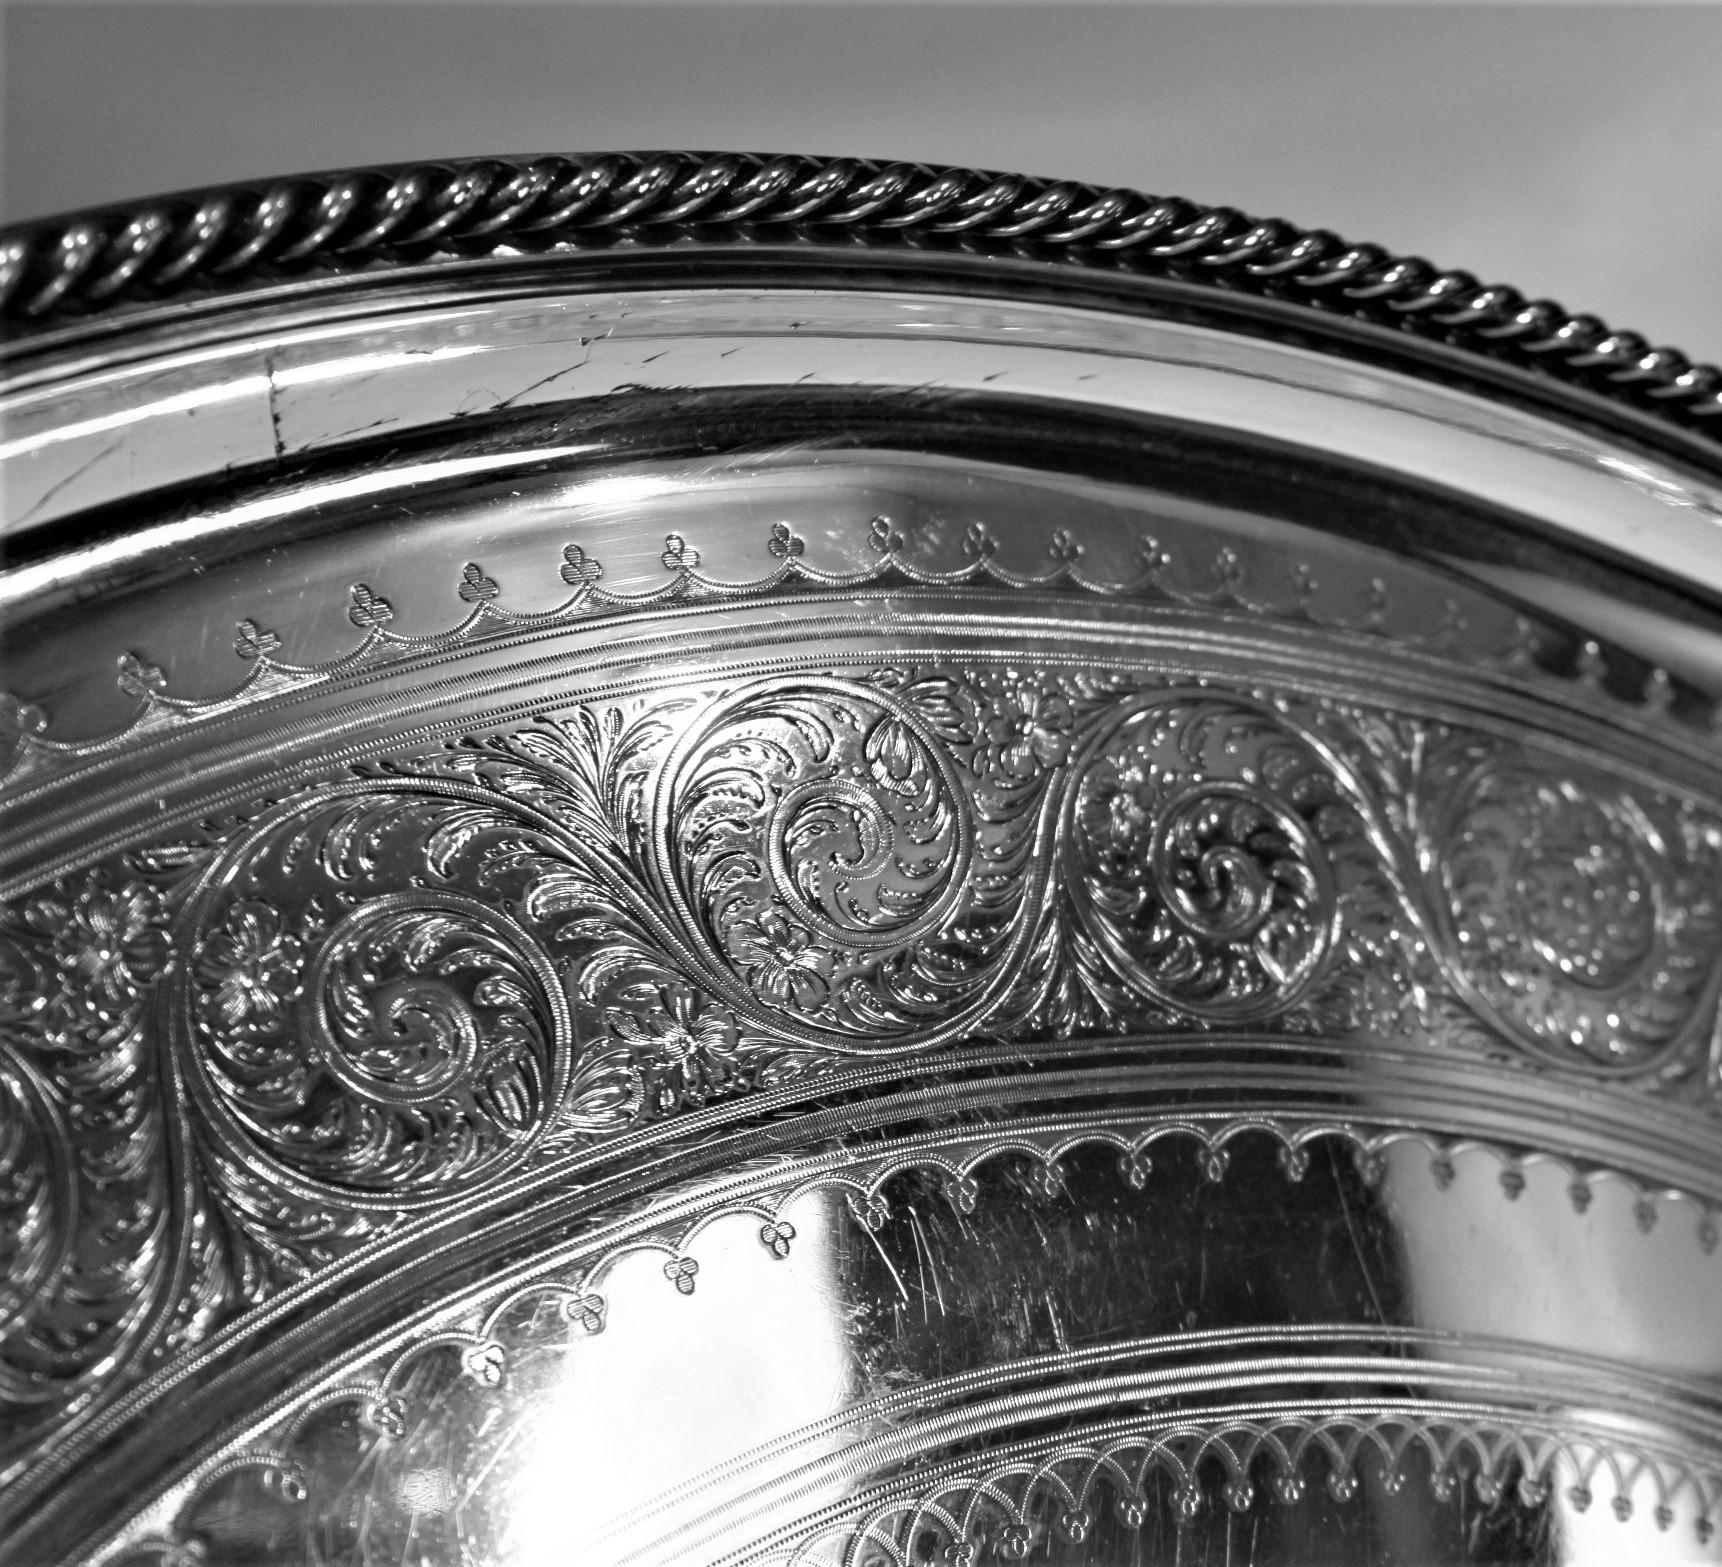 Antique English Silver Plated Serving Tray with Ornate Engraving and Handles In Good Condition For Sale In Hamilton, Ontario